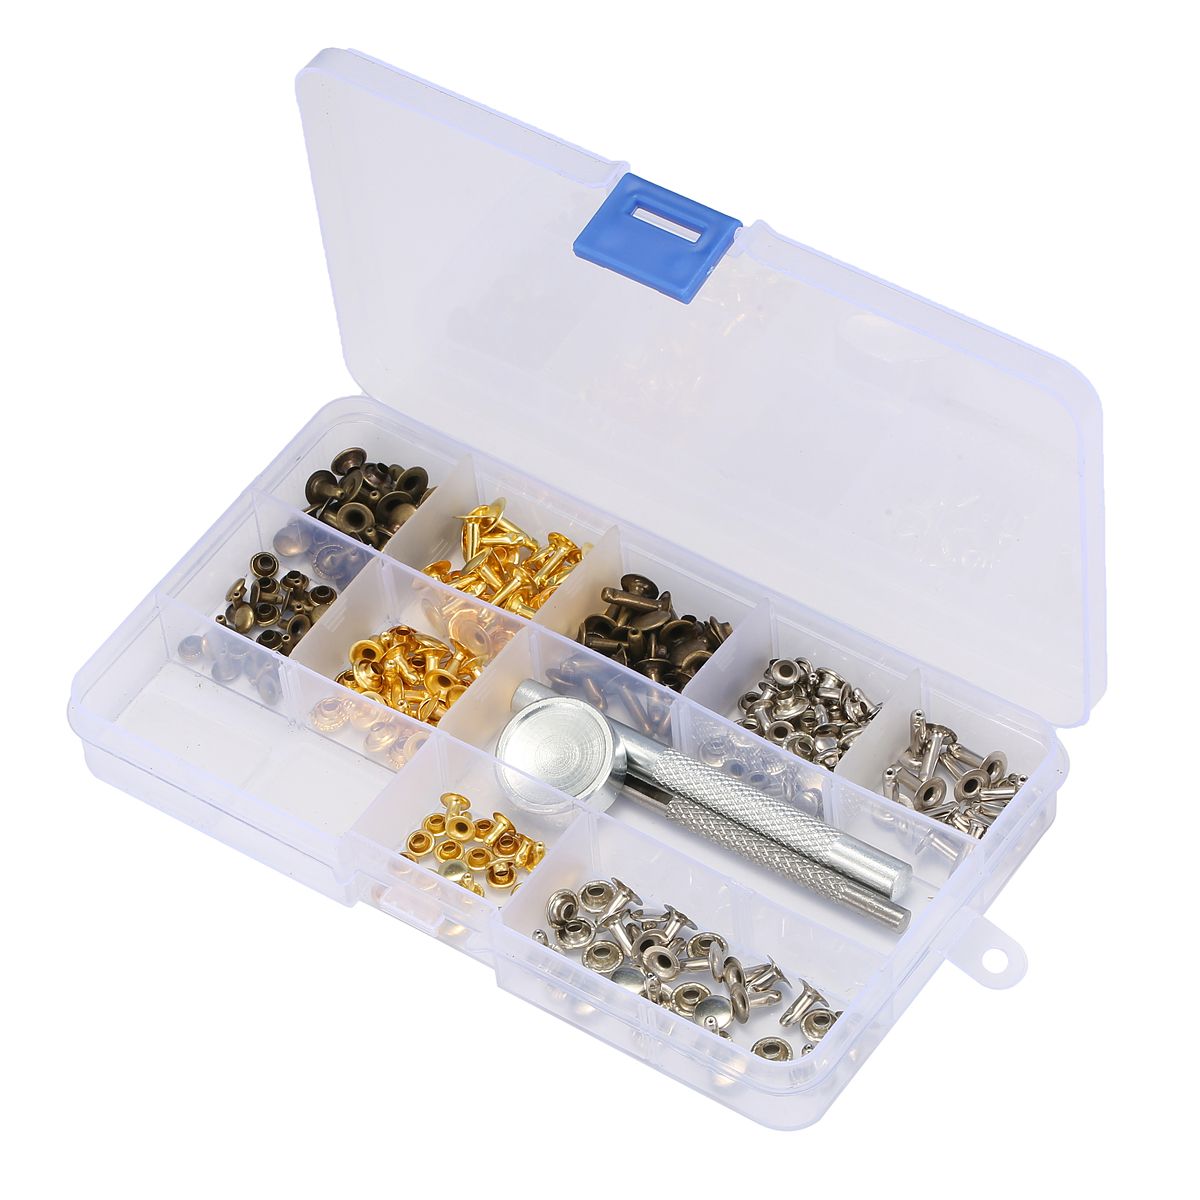 135-pcs-Single-Cap-Rivets-Metal-Leather-Rivets-with-3-Pieces-Tool-kits-for-Rivets-Replacemen-1252901